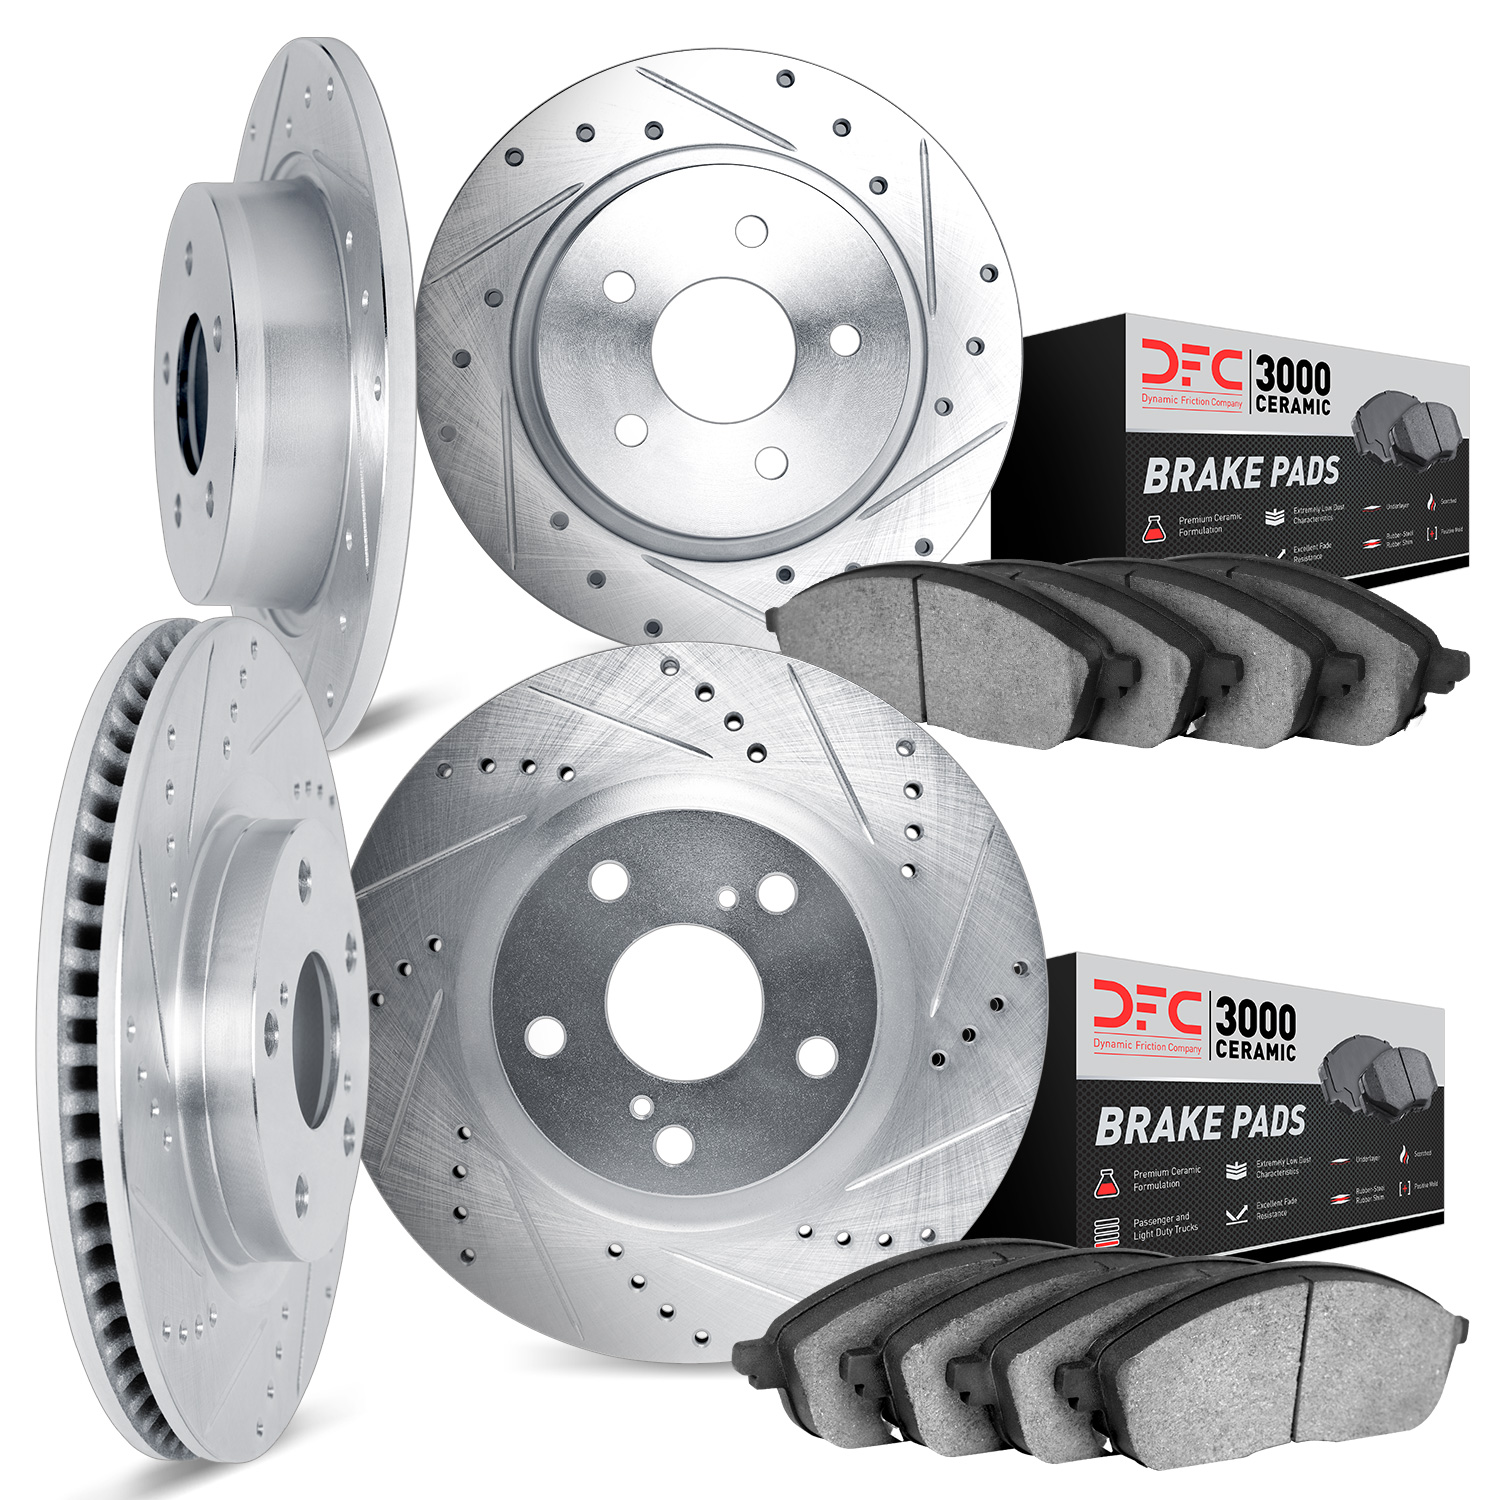 7304-54085 Drilled/Slotted Brake Rotor with 3000-Series Ceramic Brake Pads Kit [Silver], 2011-2015 Ford/Lincoln/Mercury/Mazda, P